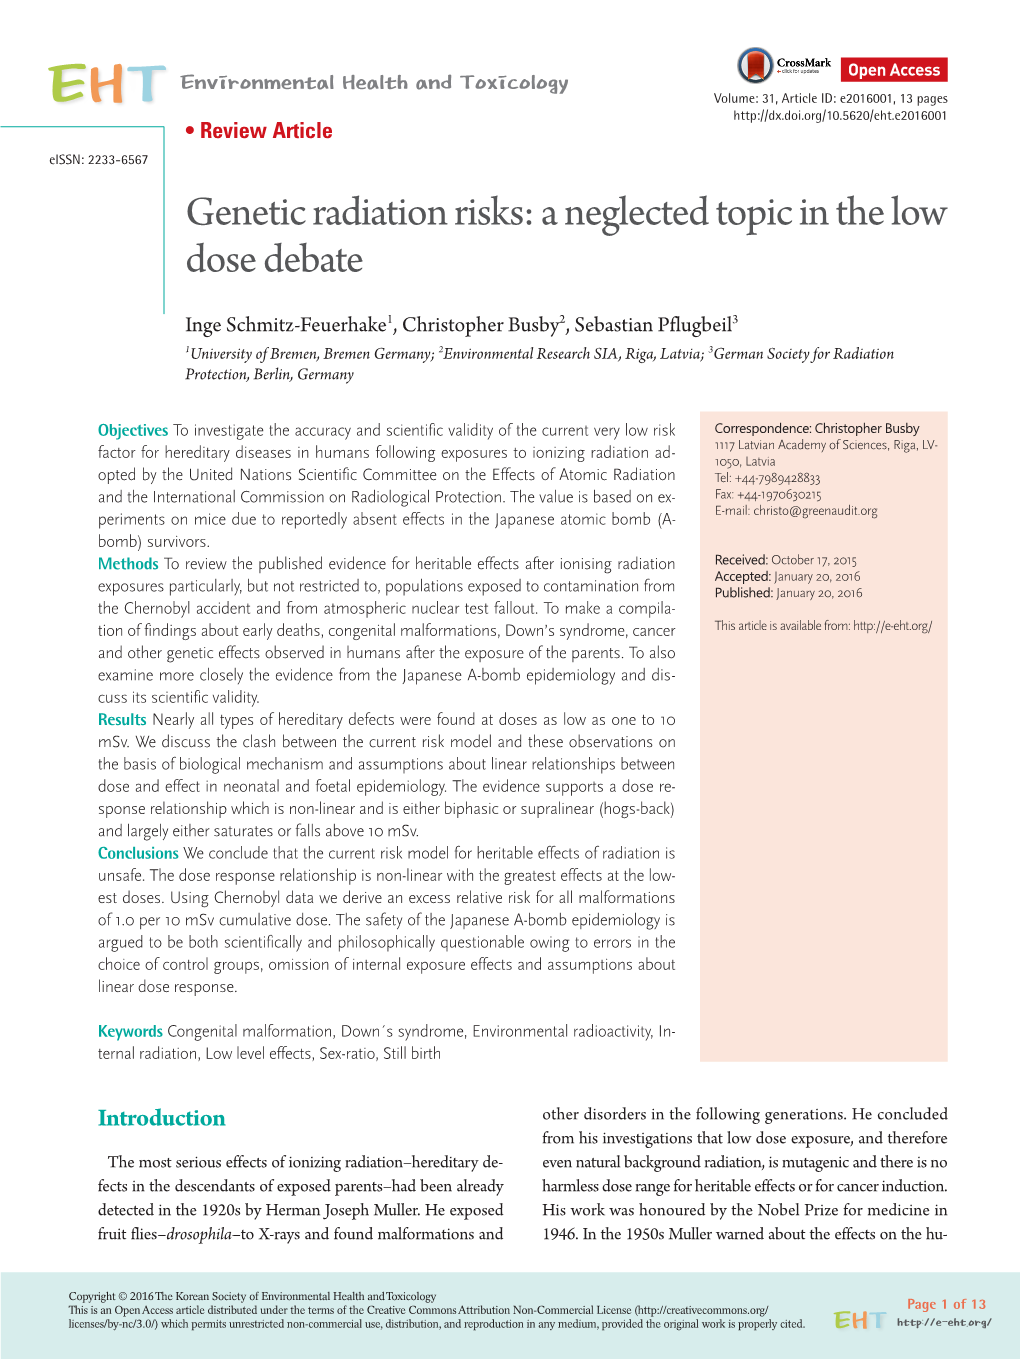 Genetic Radiation Risks: a Neglected Topic in the Low Dose Debate